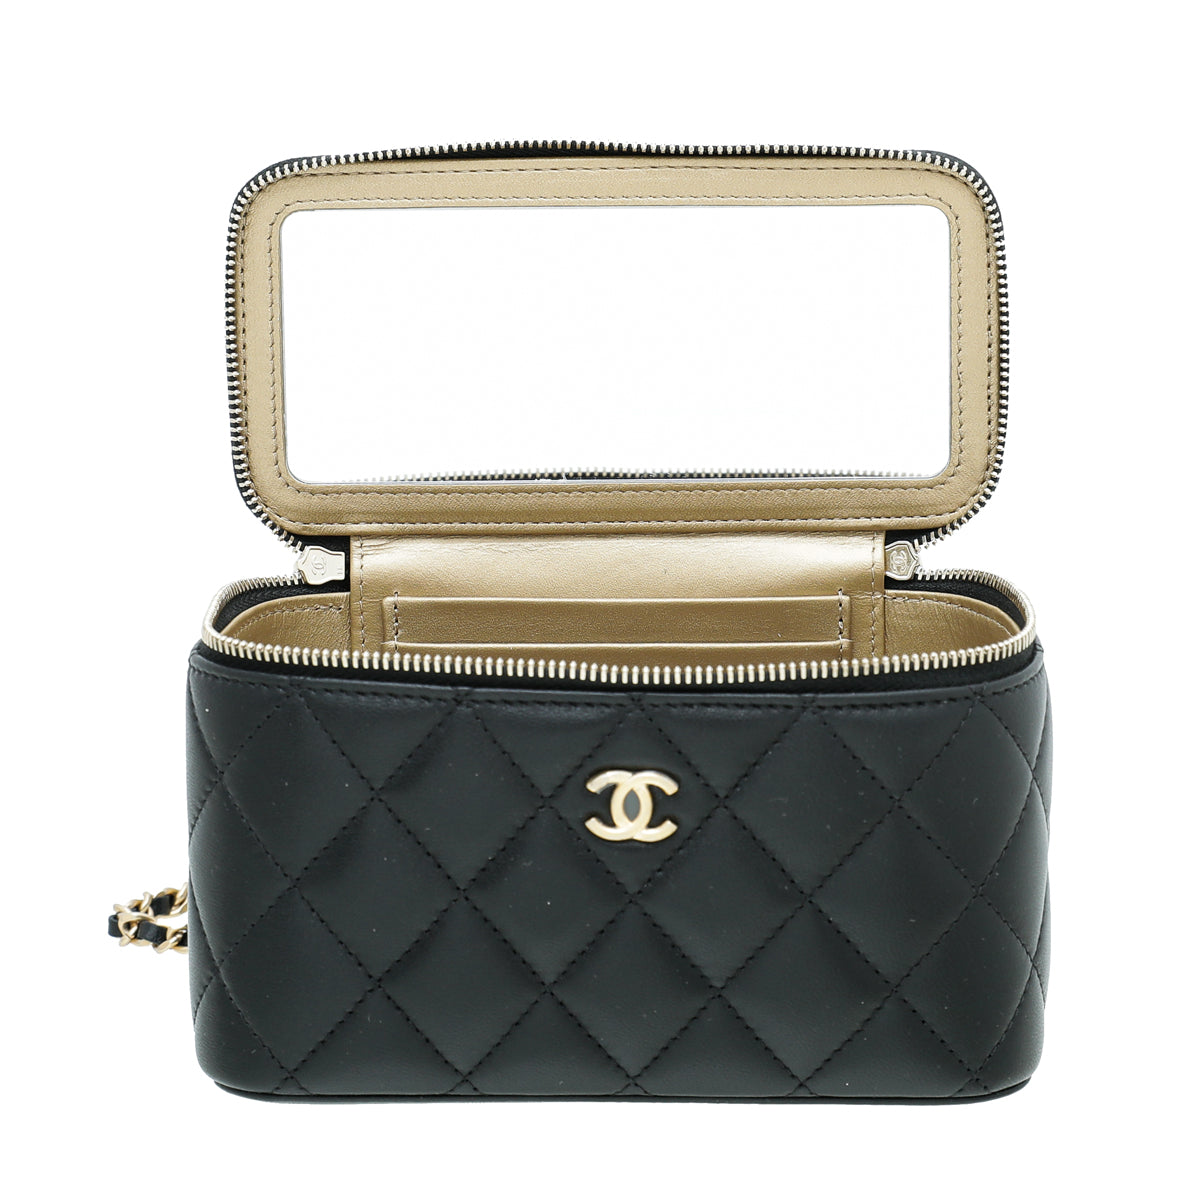 CHANEL Lambskin Camellia Embossed Small Vanity Case With Chain Black 714149